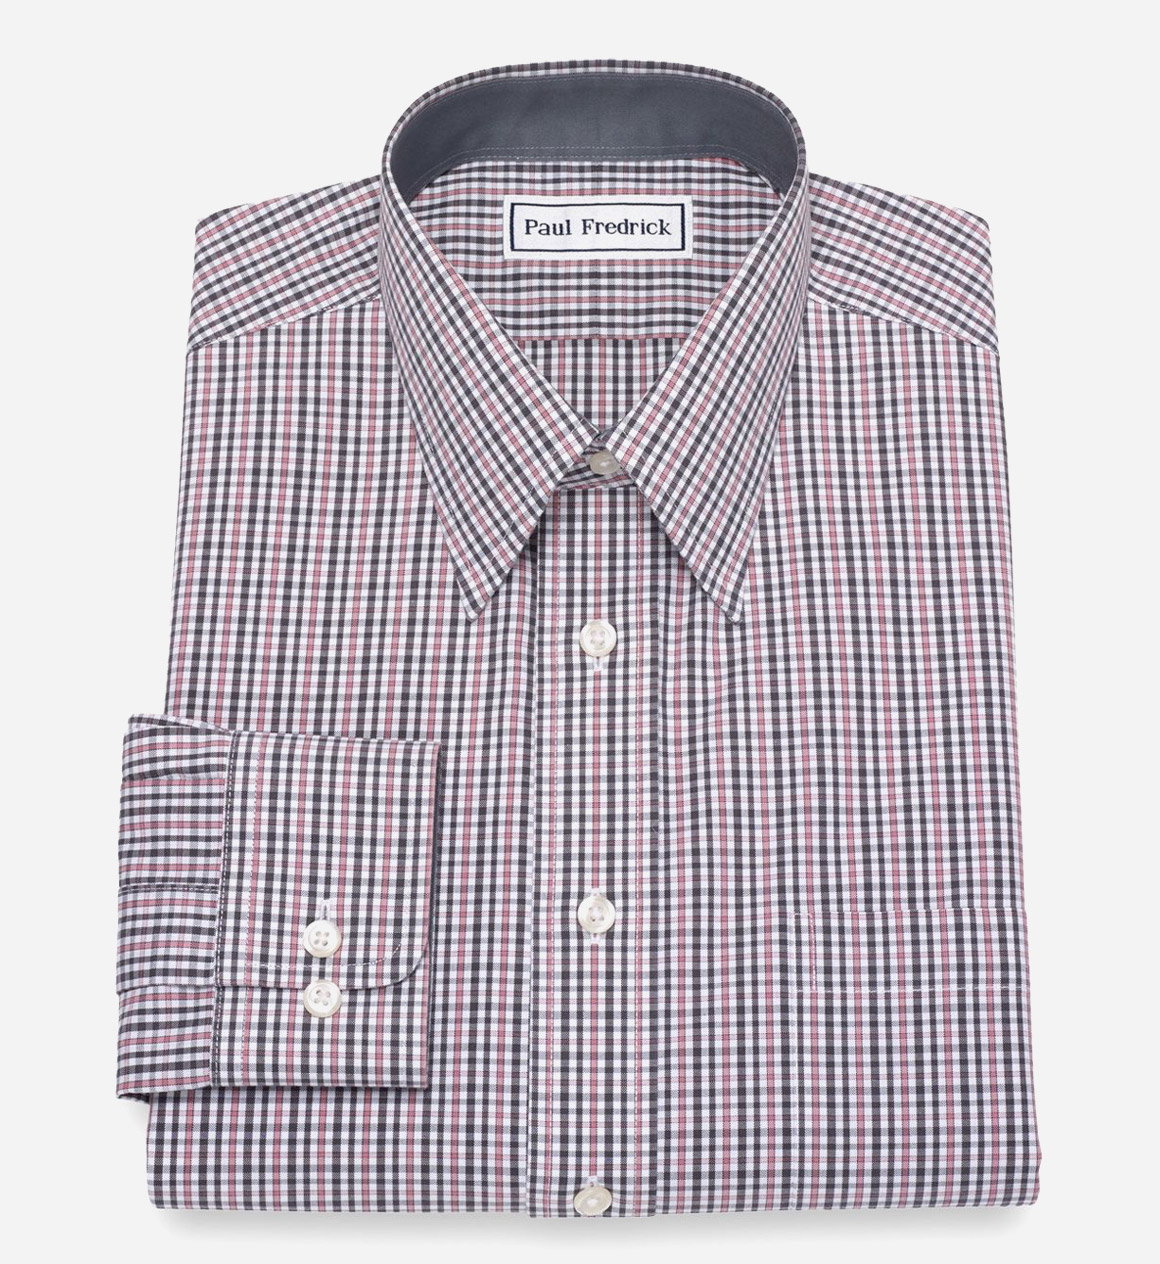 Paul Fredrick: Extra 30% off clearance dress shirts, ties and more ...